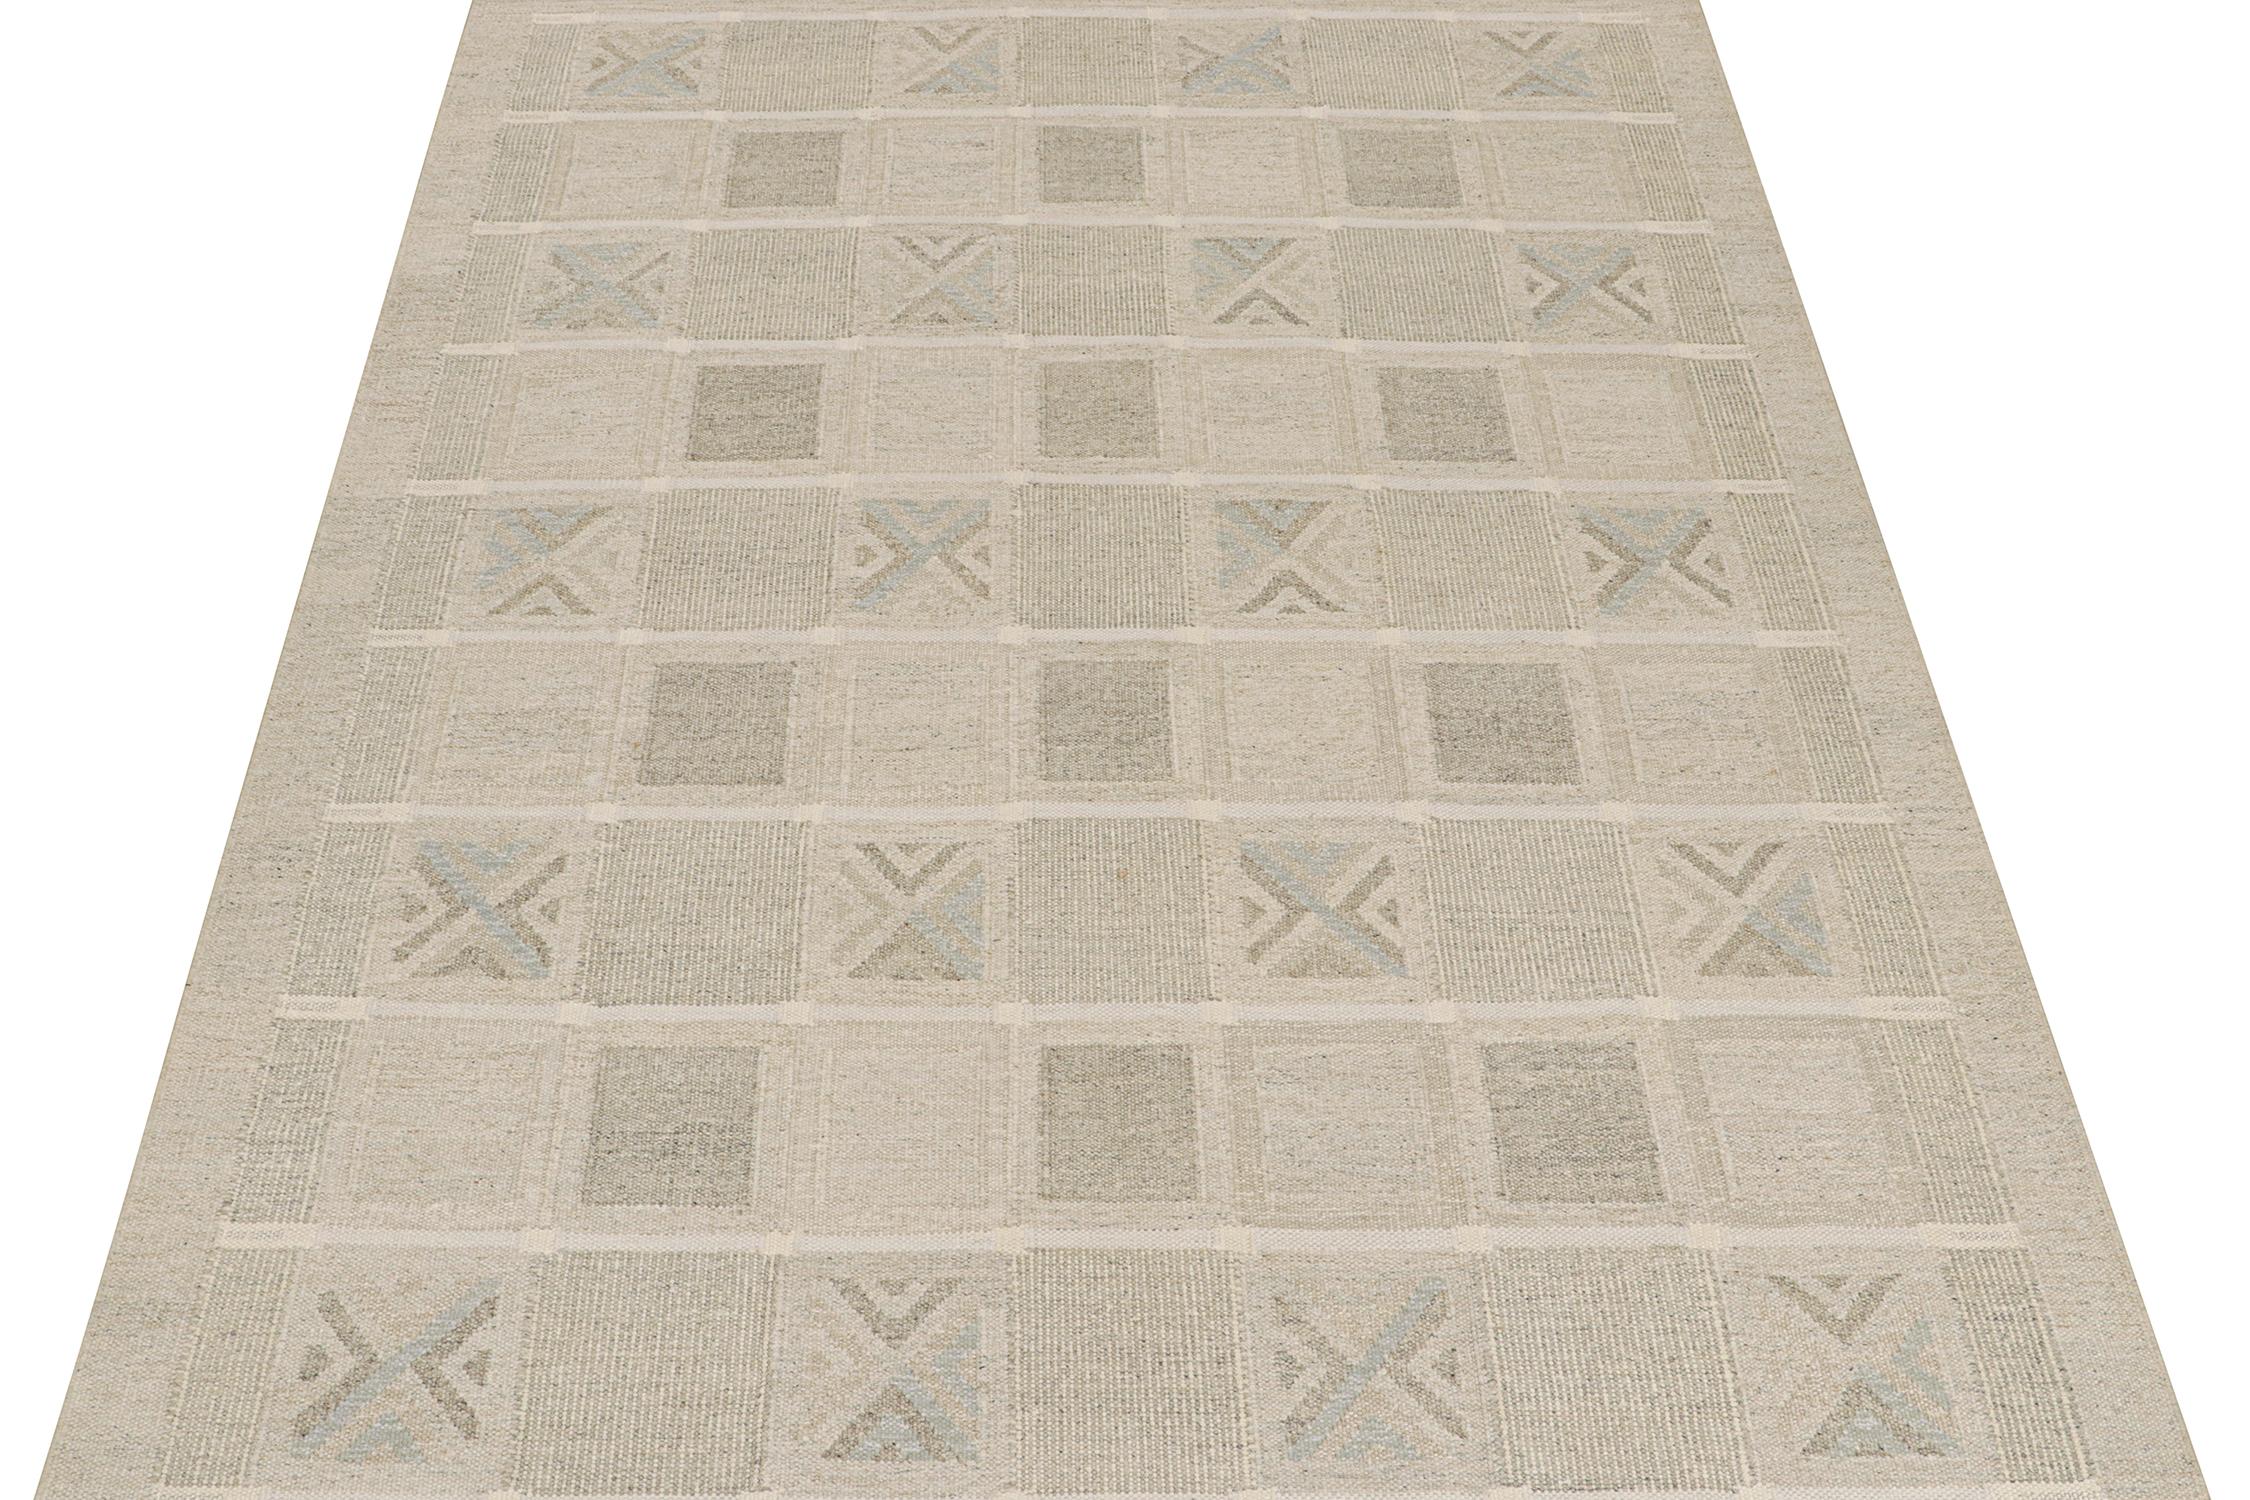 This 9x12 flat weave is a new addition to the Scandinavian Kilim collection by Rug & Kilim. Handwoven in wool and natural yarns, its design reflects a contemporary take on mid-century Rollakans and Swedish Deco style.

On the Design:

This new